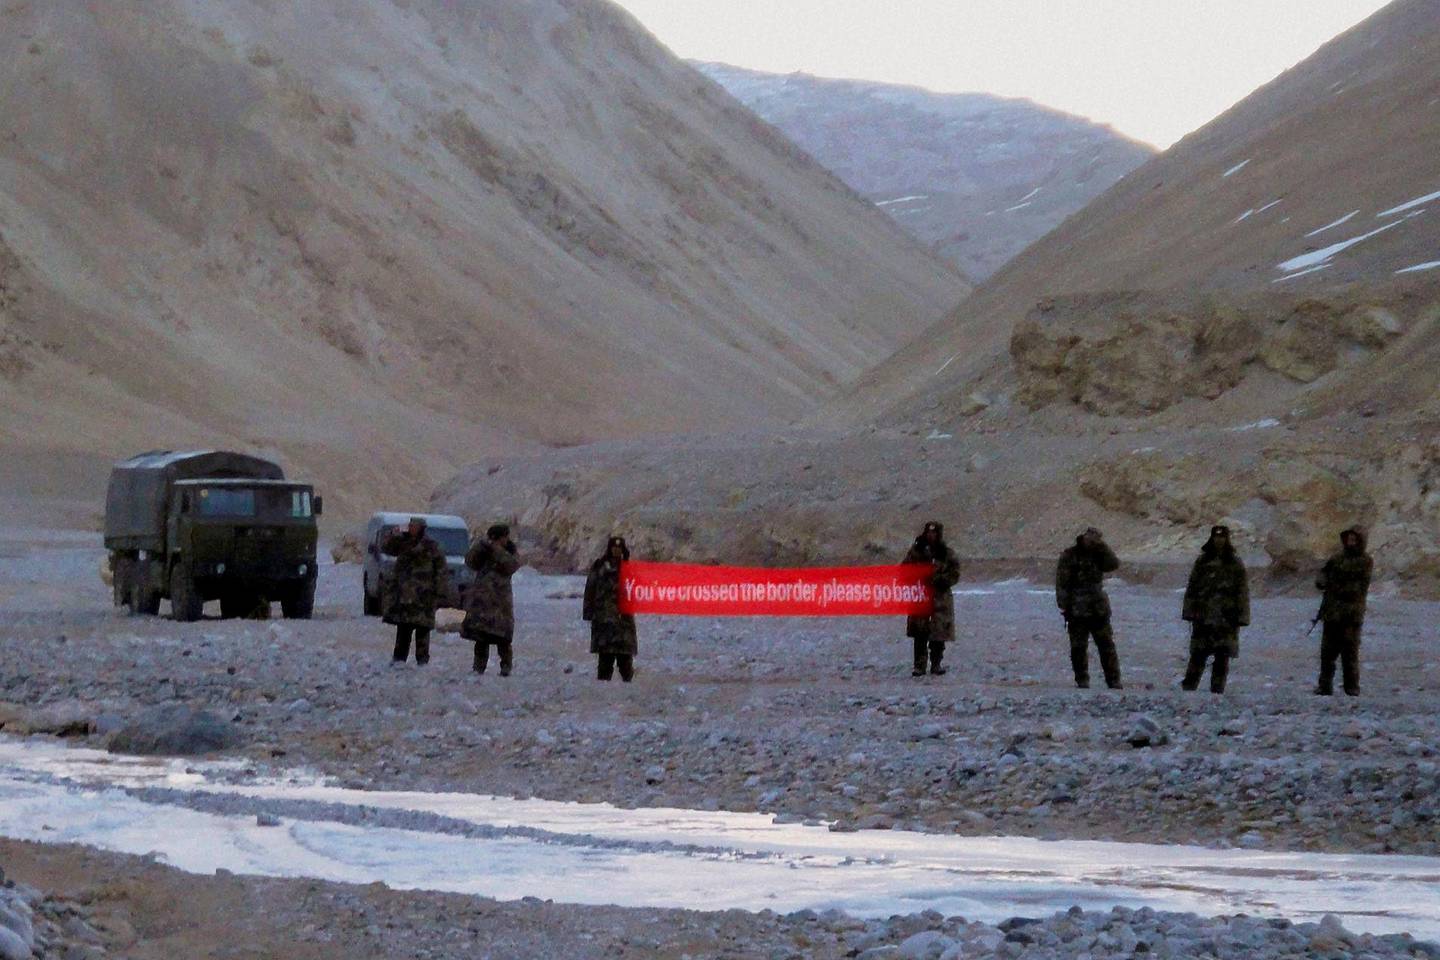 FILE - In this May 5, 2013, file photo, Chinese troops hold a banner which reads: "You've crossed the border, please go back" in Ladakh, India. China on Tuesday, June 16, 2020 accused Indian forces along their Himalayan border of carrying out "provocative attacks" on its troops, leading to "serious physical conflicts" between the sides. (AP Photo, File)